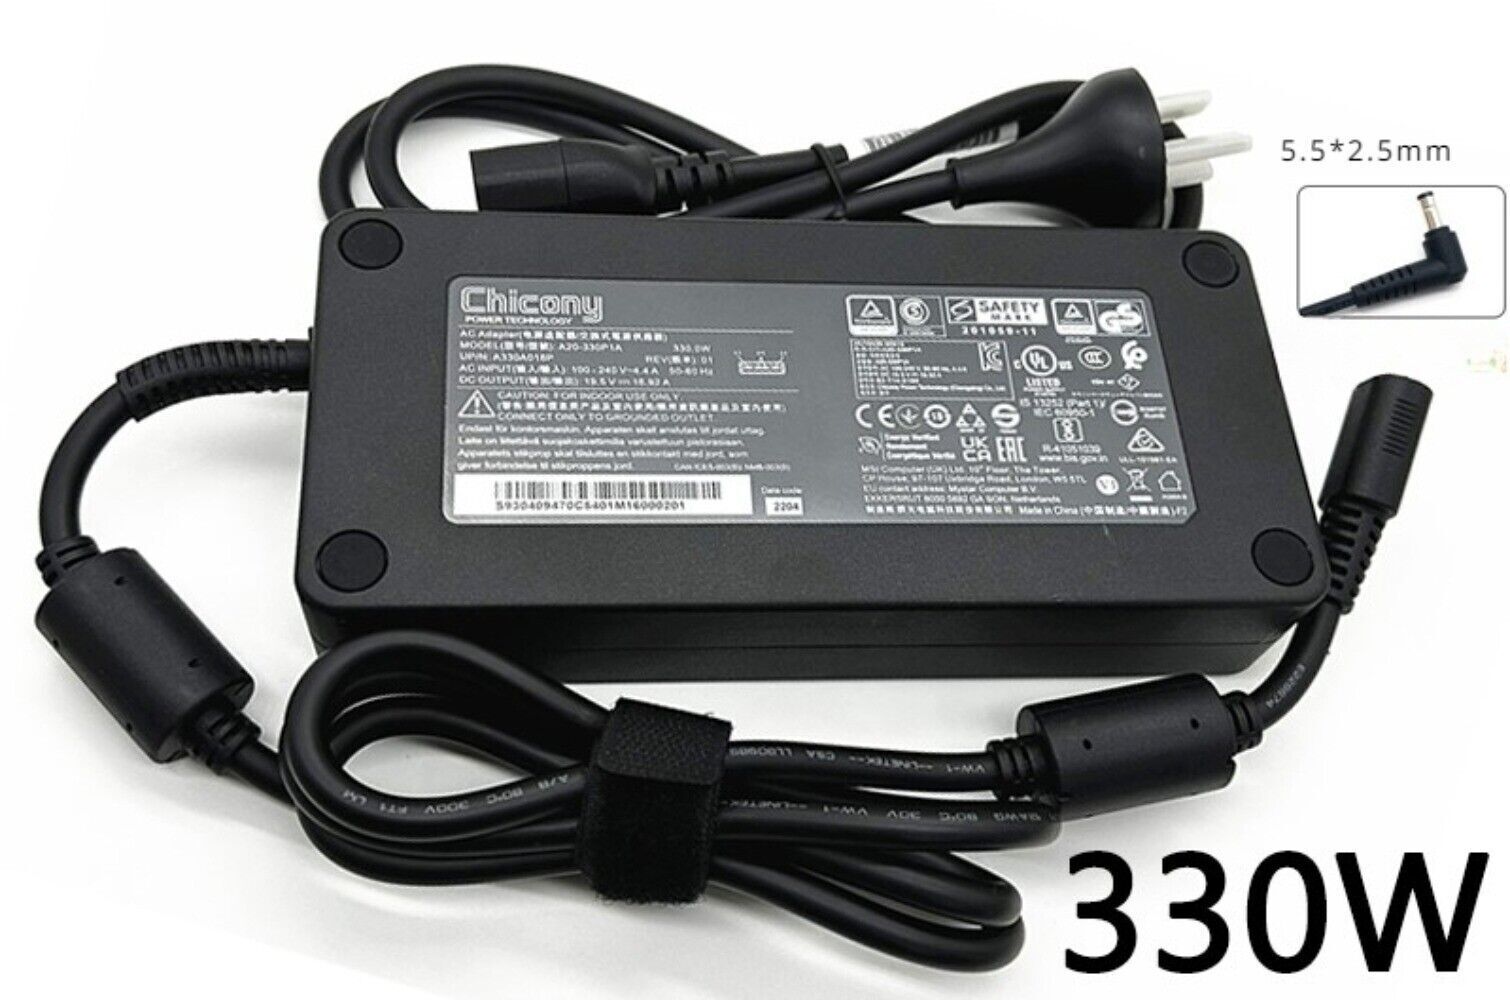 1PCS Chicony 330W 19.5V 16.92A Charger A20-330P1A 5.5*2.5mm Tip Power Adapter